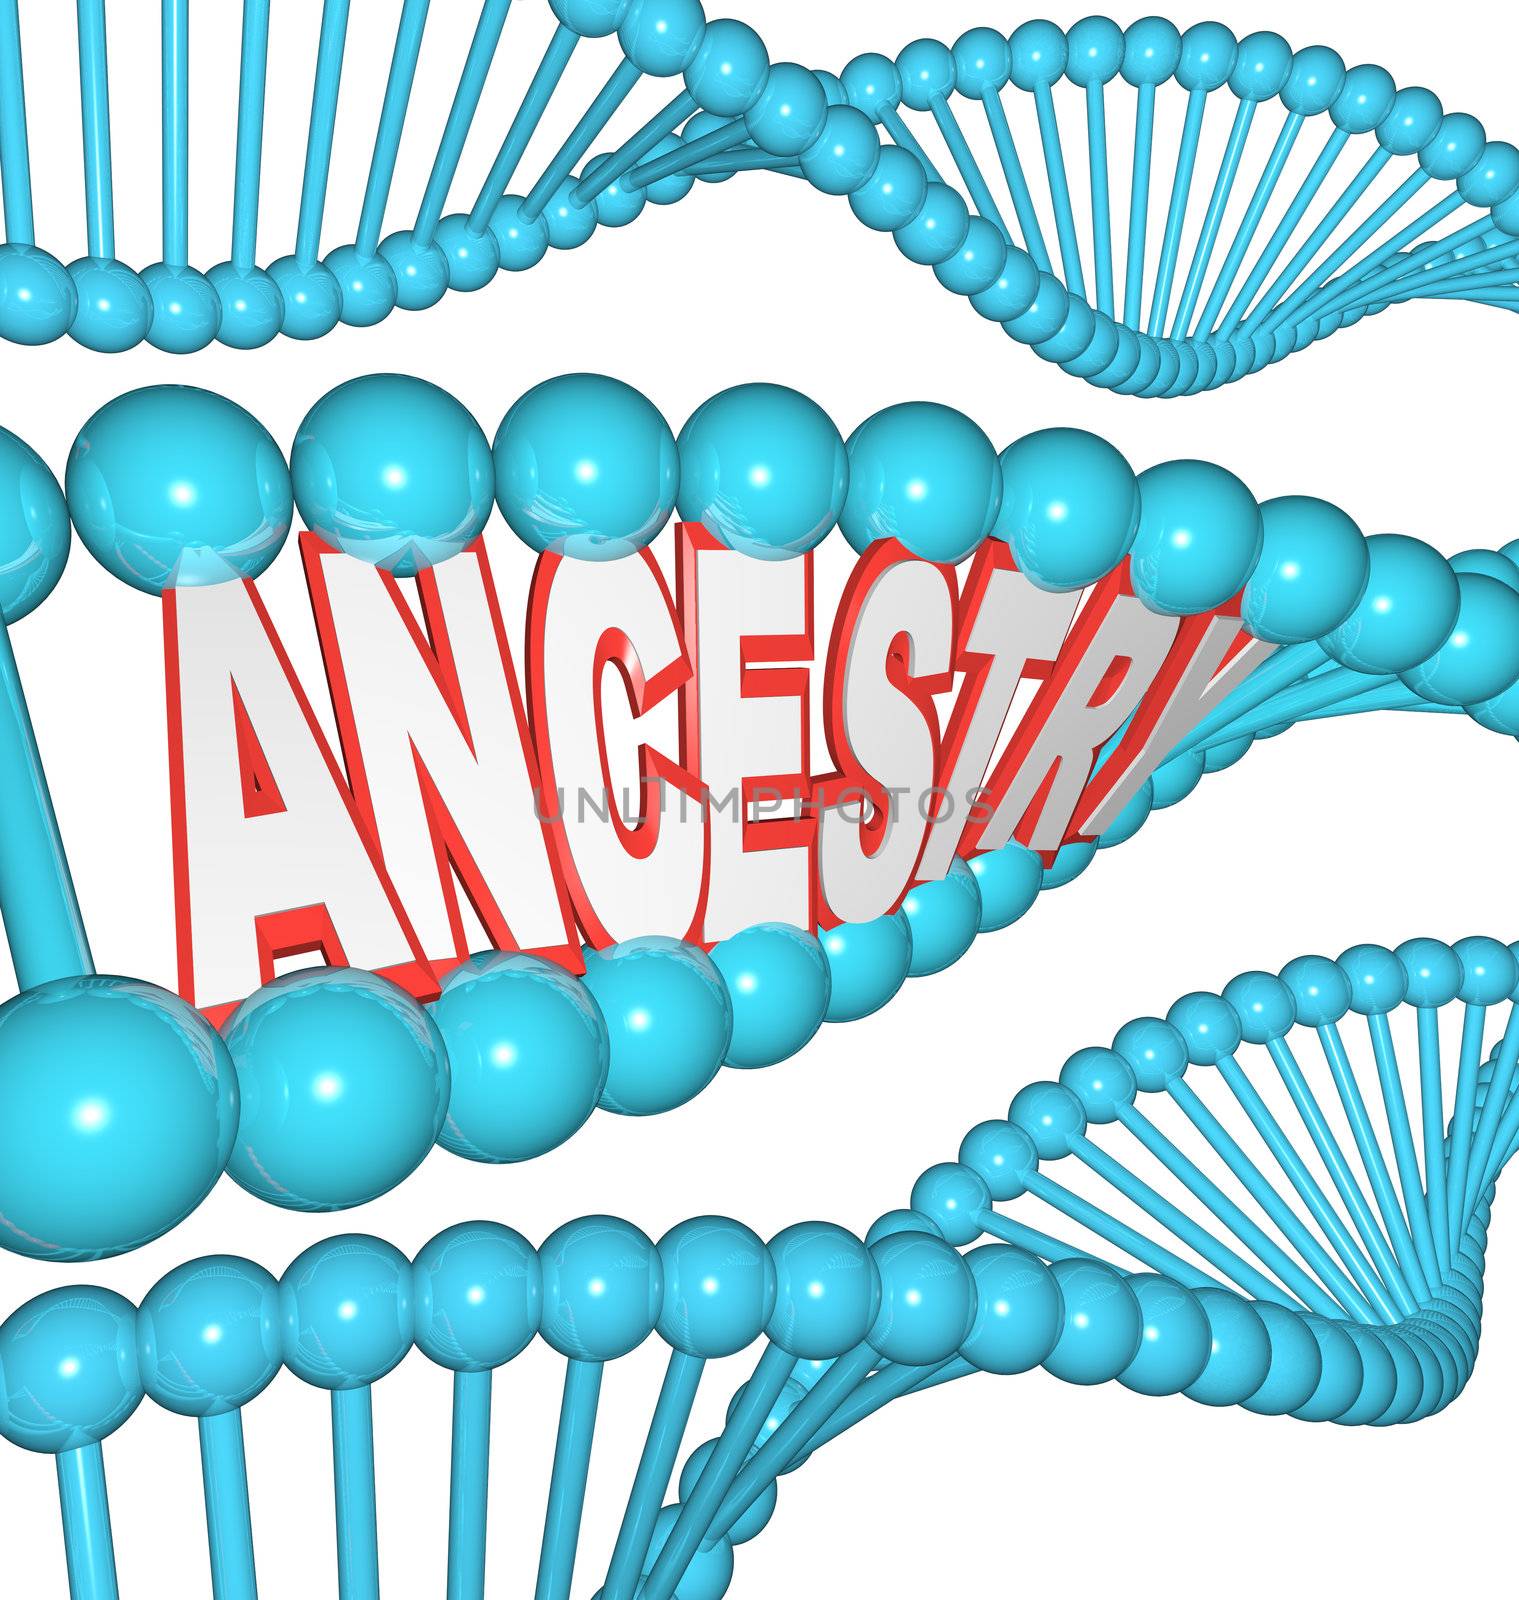 The word Ancestry in a DNA strand representing the search for your past by researching your genetics finding clues to your heritage and ancestors